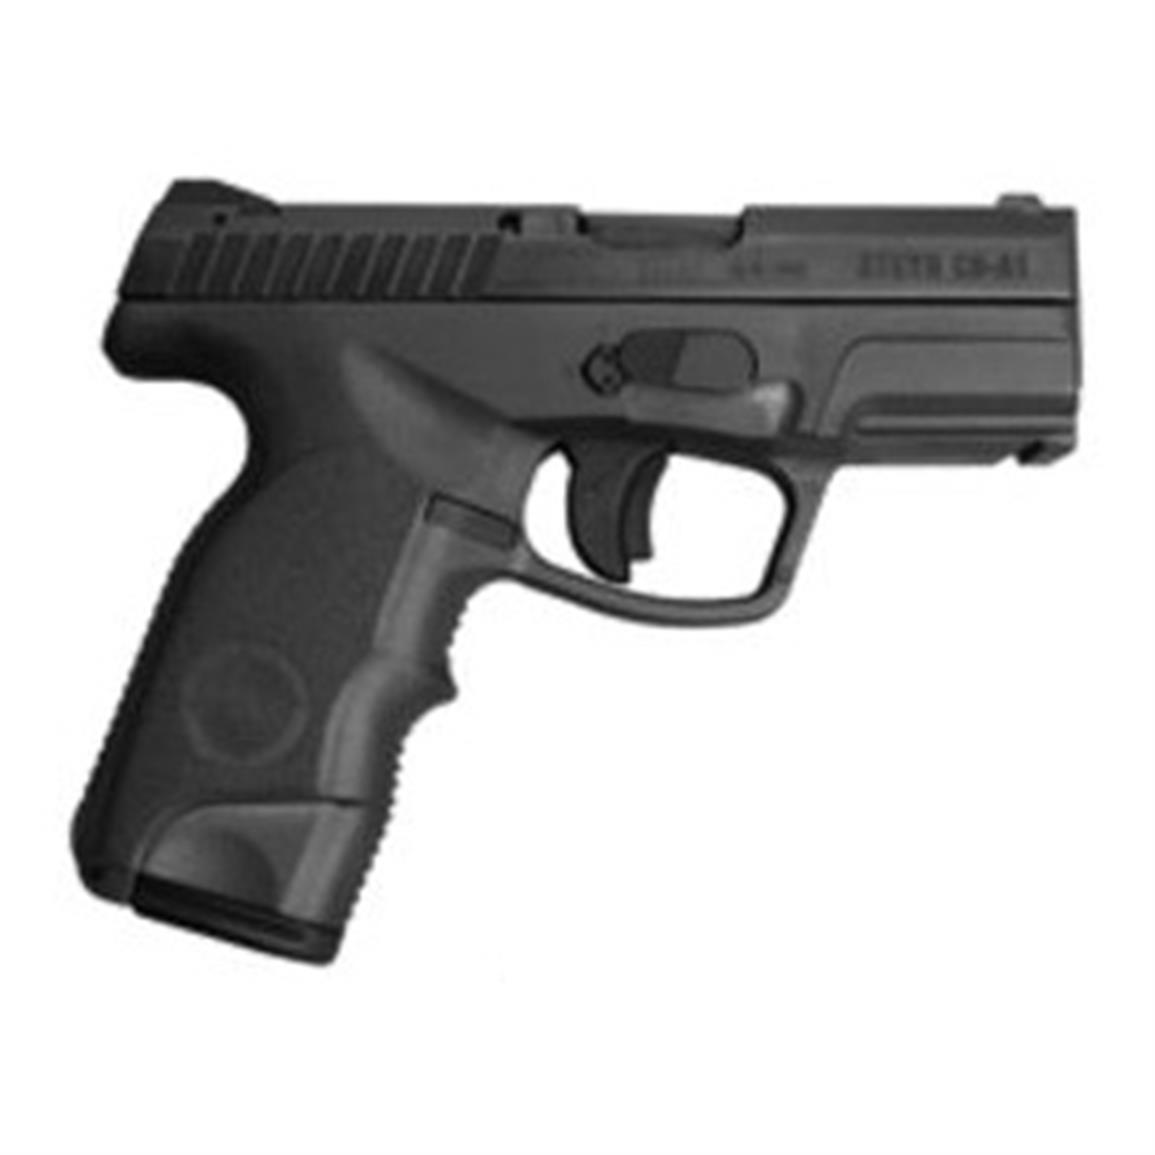 Steyr C9-A1, Semi-Automatic, 9mm, 3.6" Barrel, 17+1 Rounds